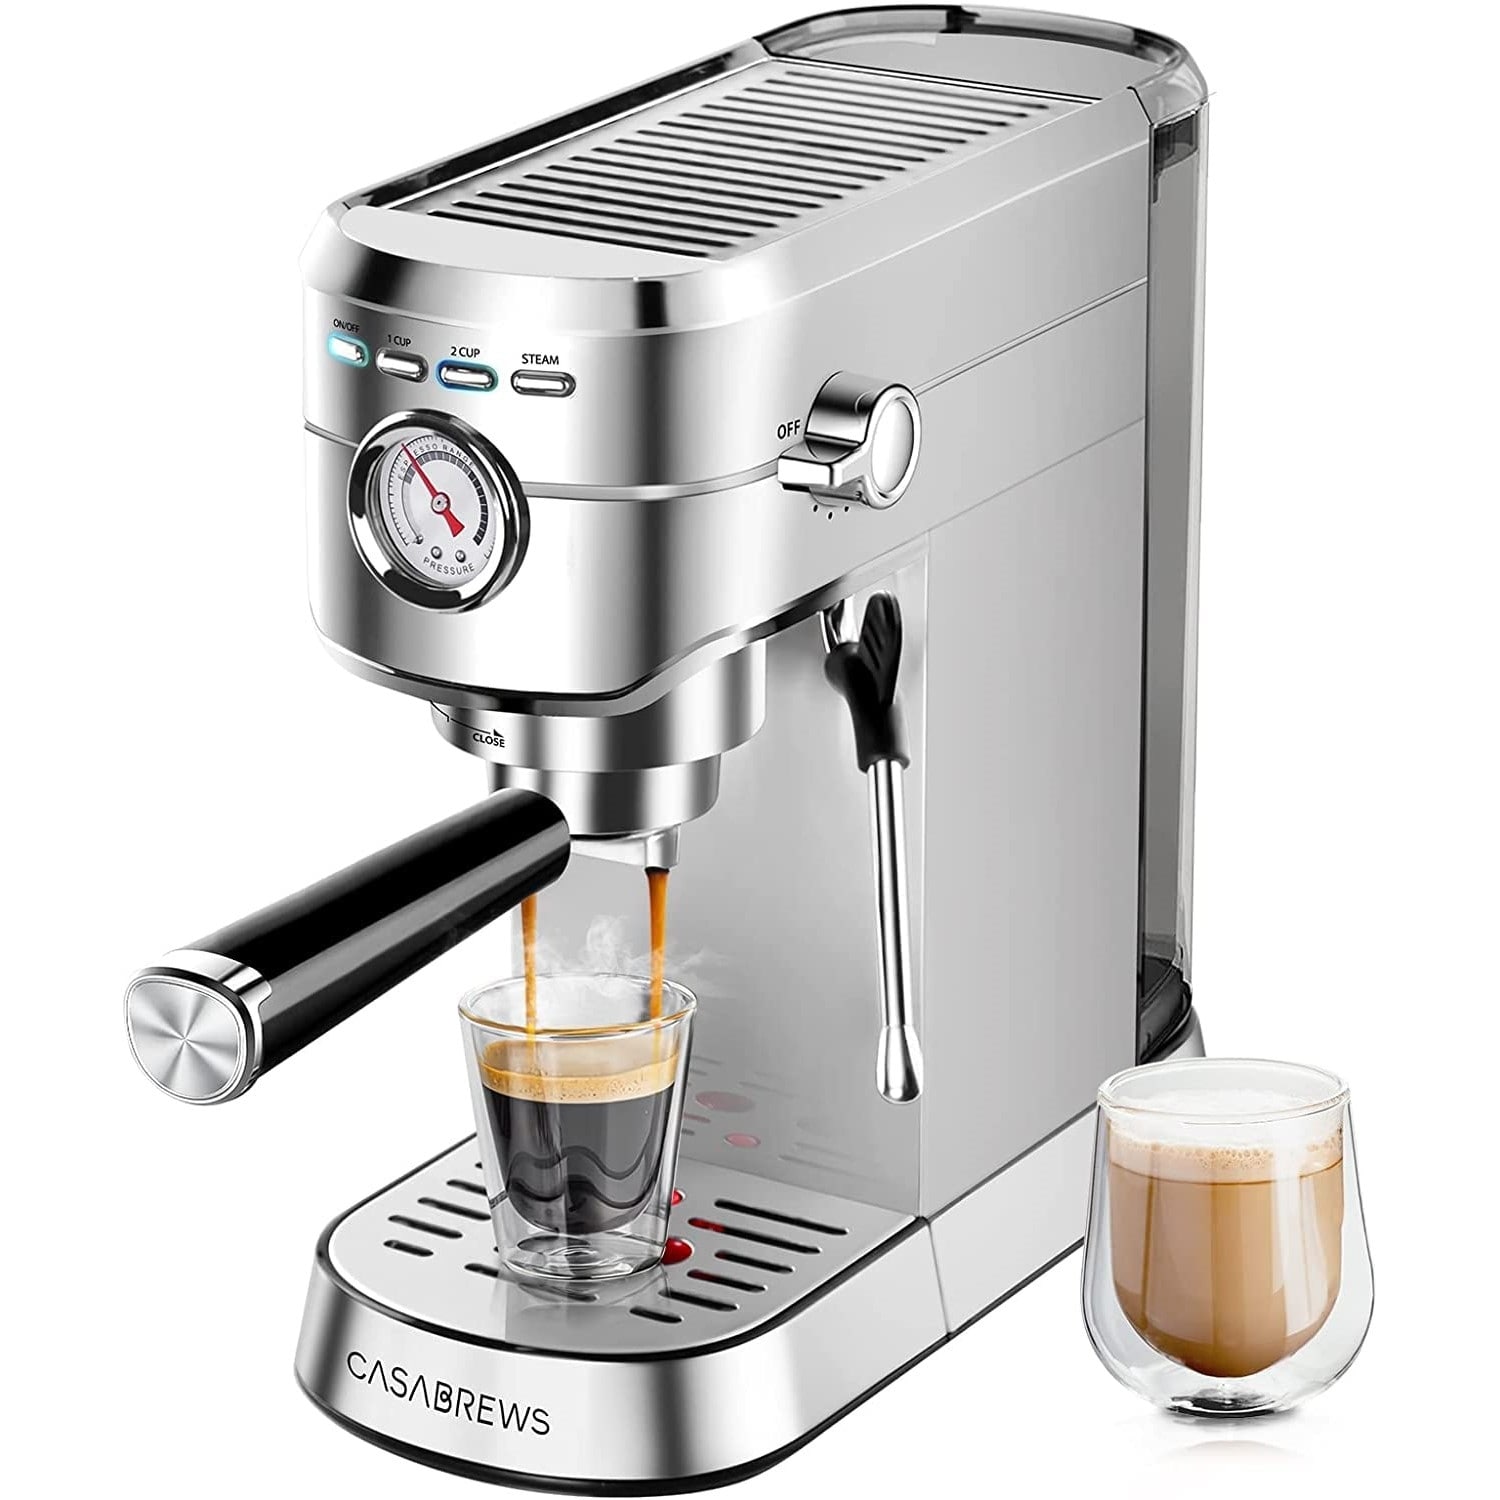 https://ak1.ostkcdn.com/images/products/is/images/direct/bbd63508d5c11b427318e95208cd0f5c571e399d/Espresso-Machine-with-Milk-Frother-Steam-Wand-and-Removable-Water-Tank.jpg